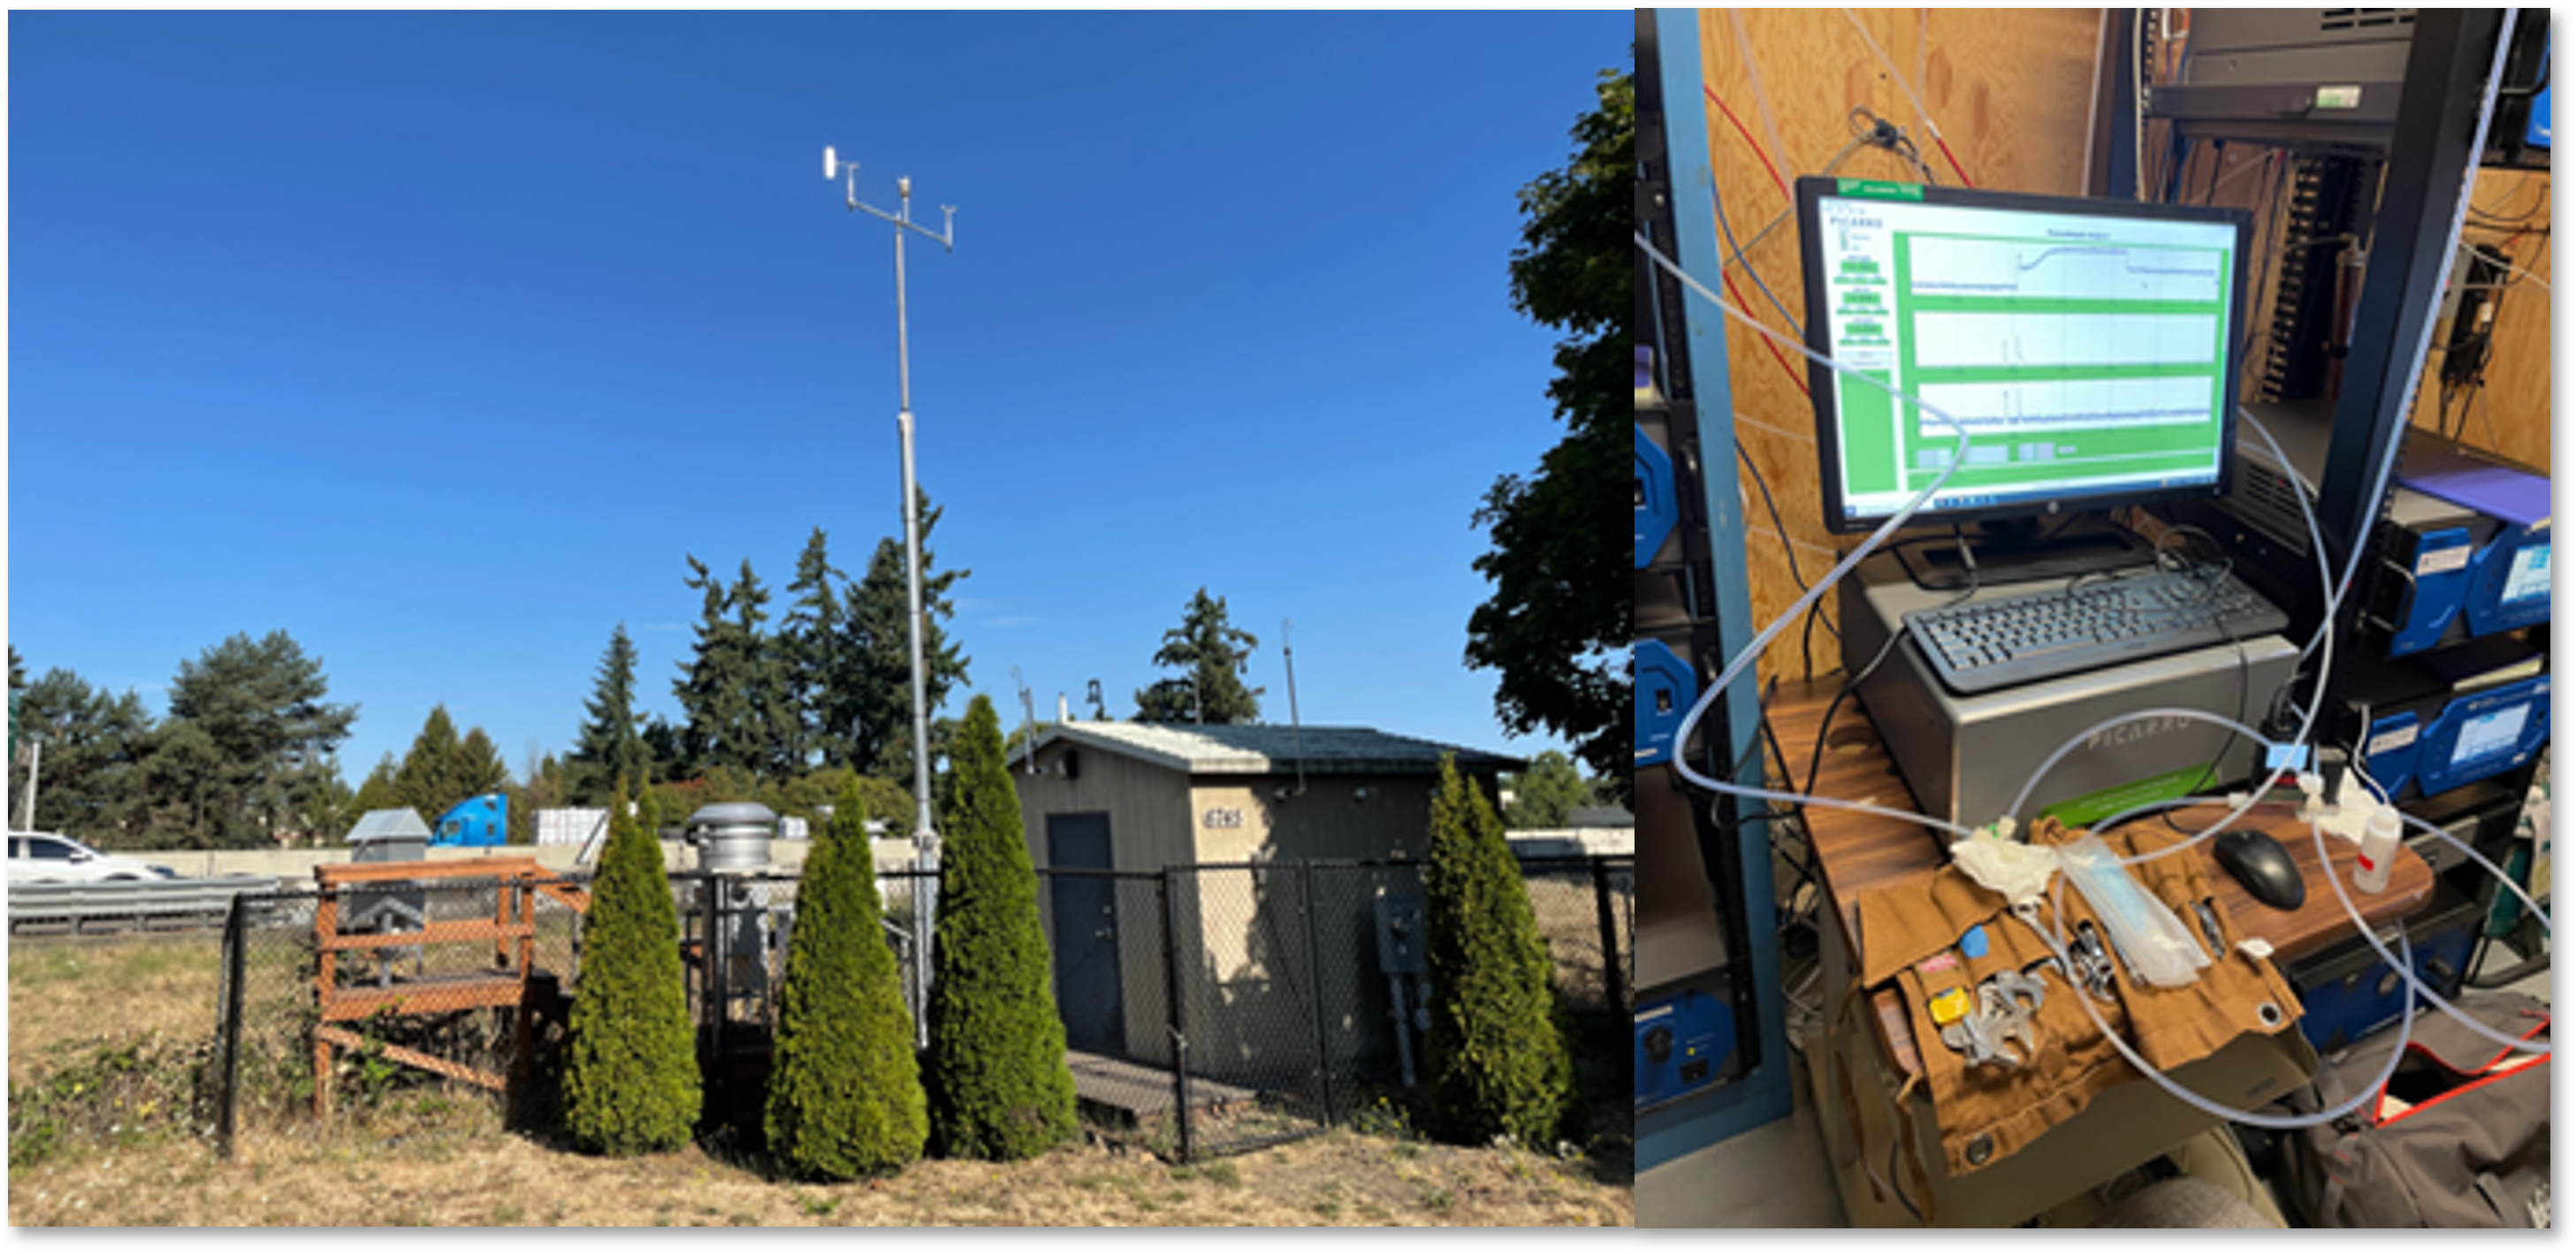 Figure 1: DEQ Near-road site in Tualatin, OR, with Picarro G2307 during assembly and calibration.